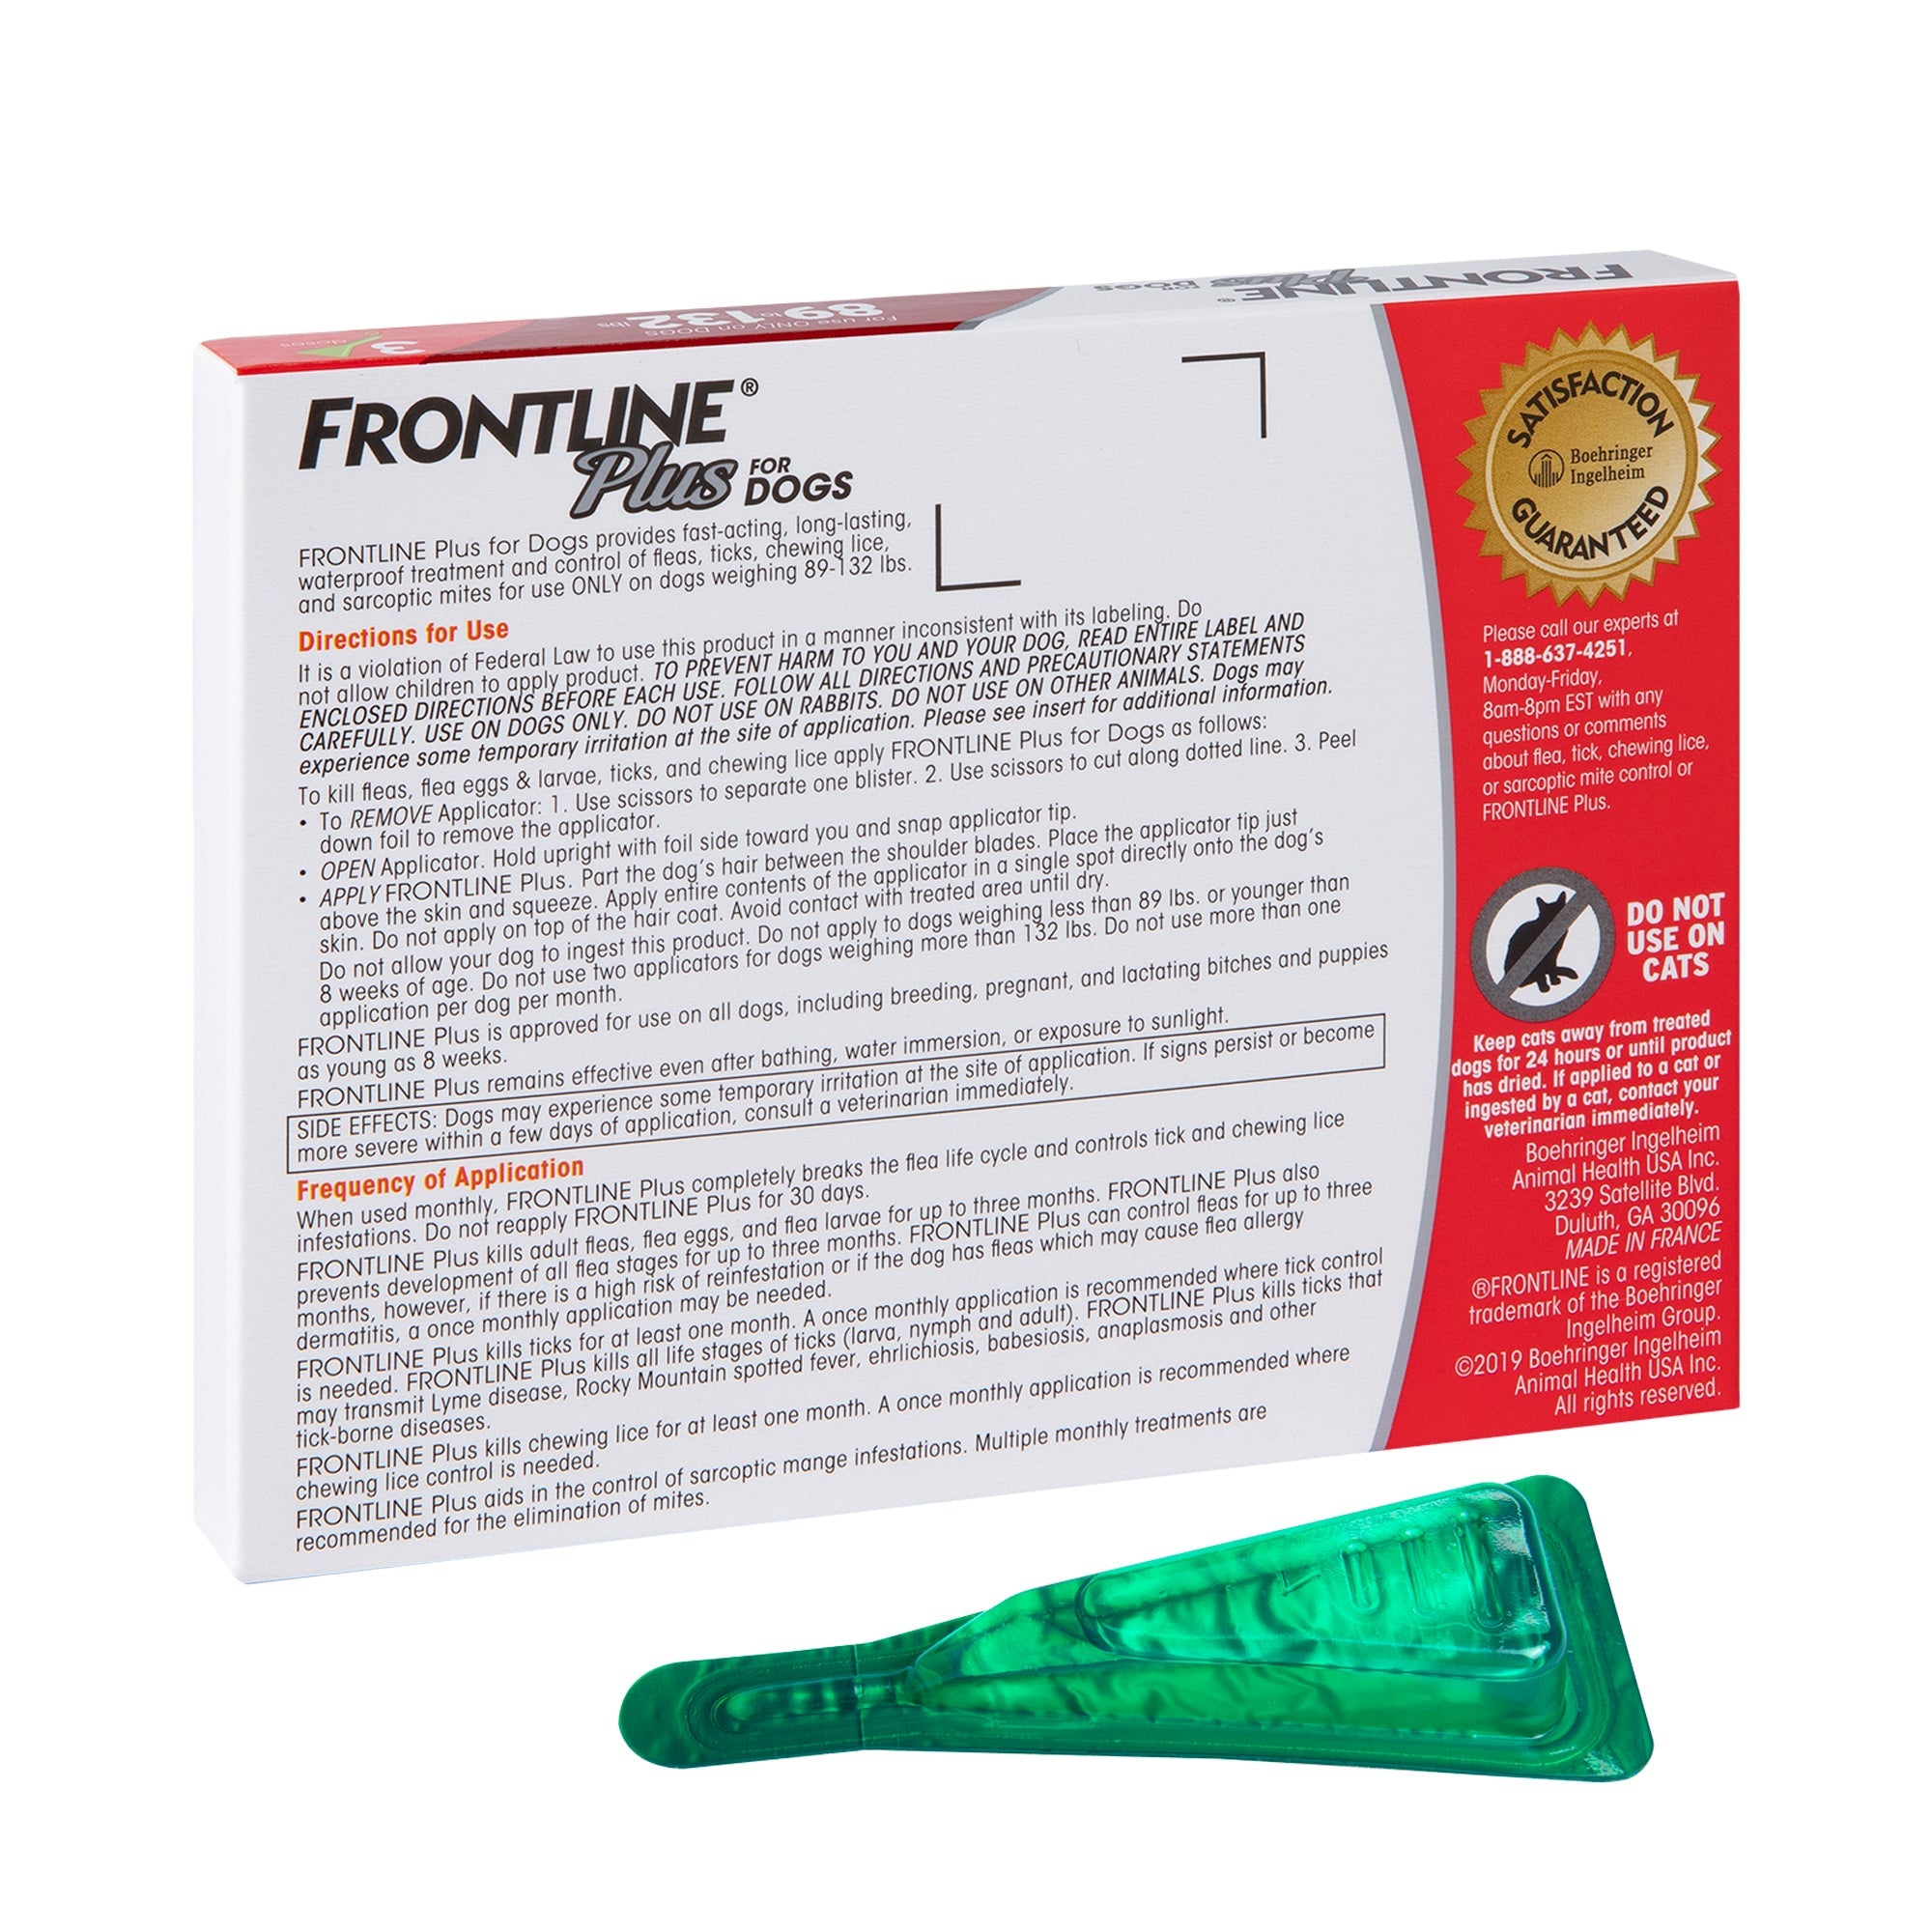 Frontlinee Plus Flea and Tick Treatment Large Dogs 45-88 Lbs, 6 Doses